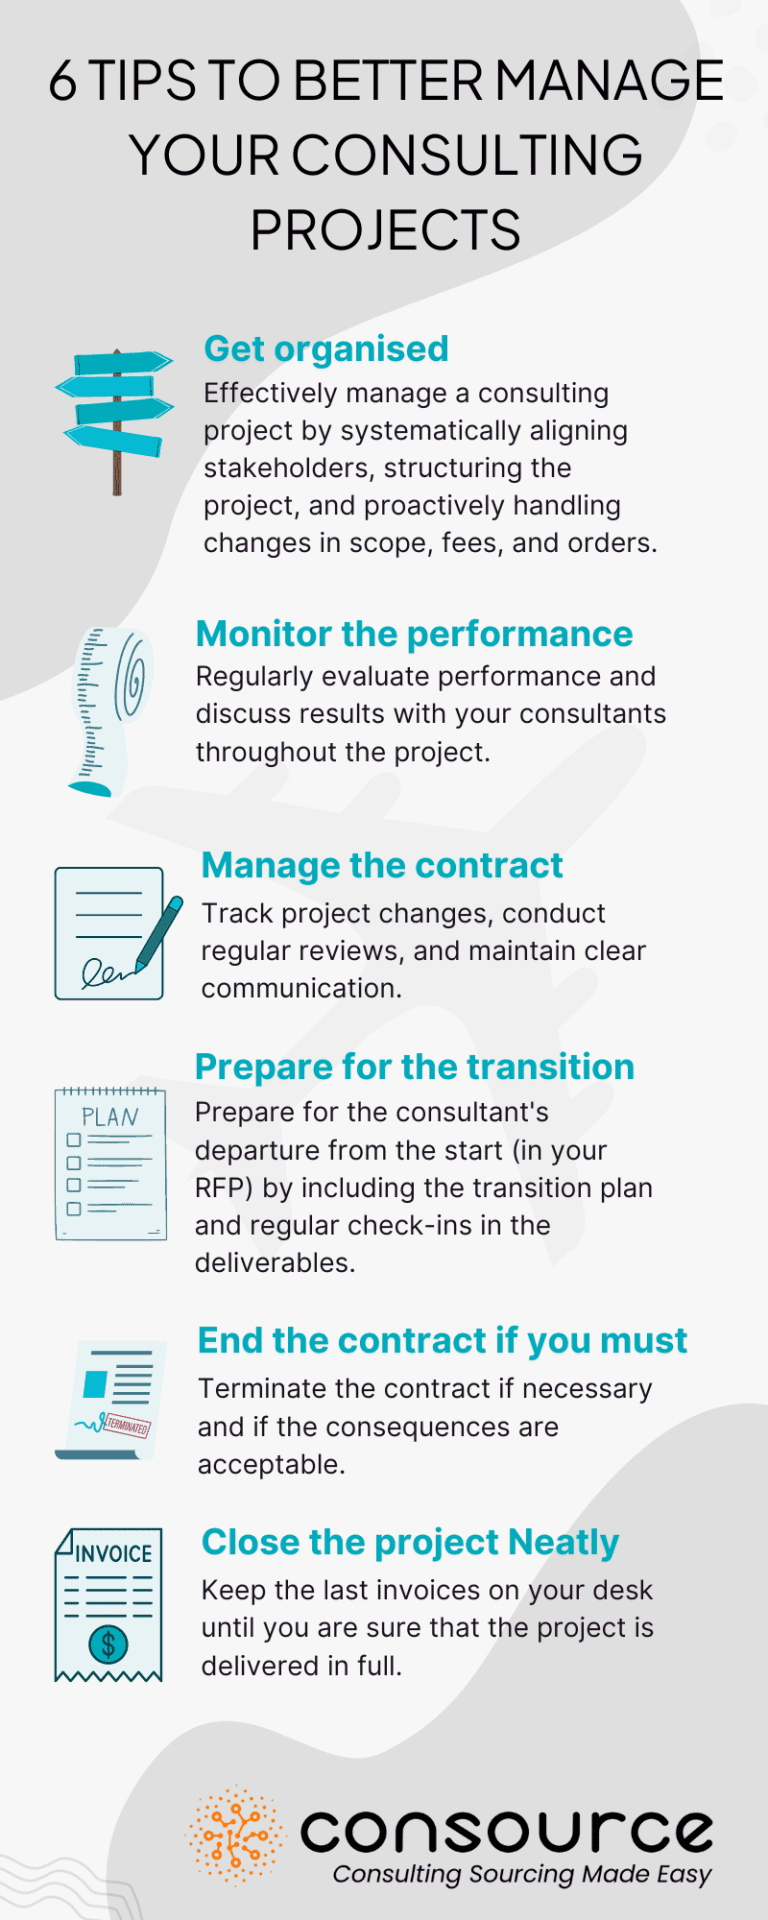 6 tips to better manage your consulting projects